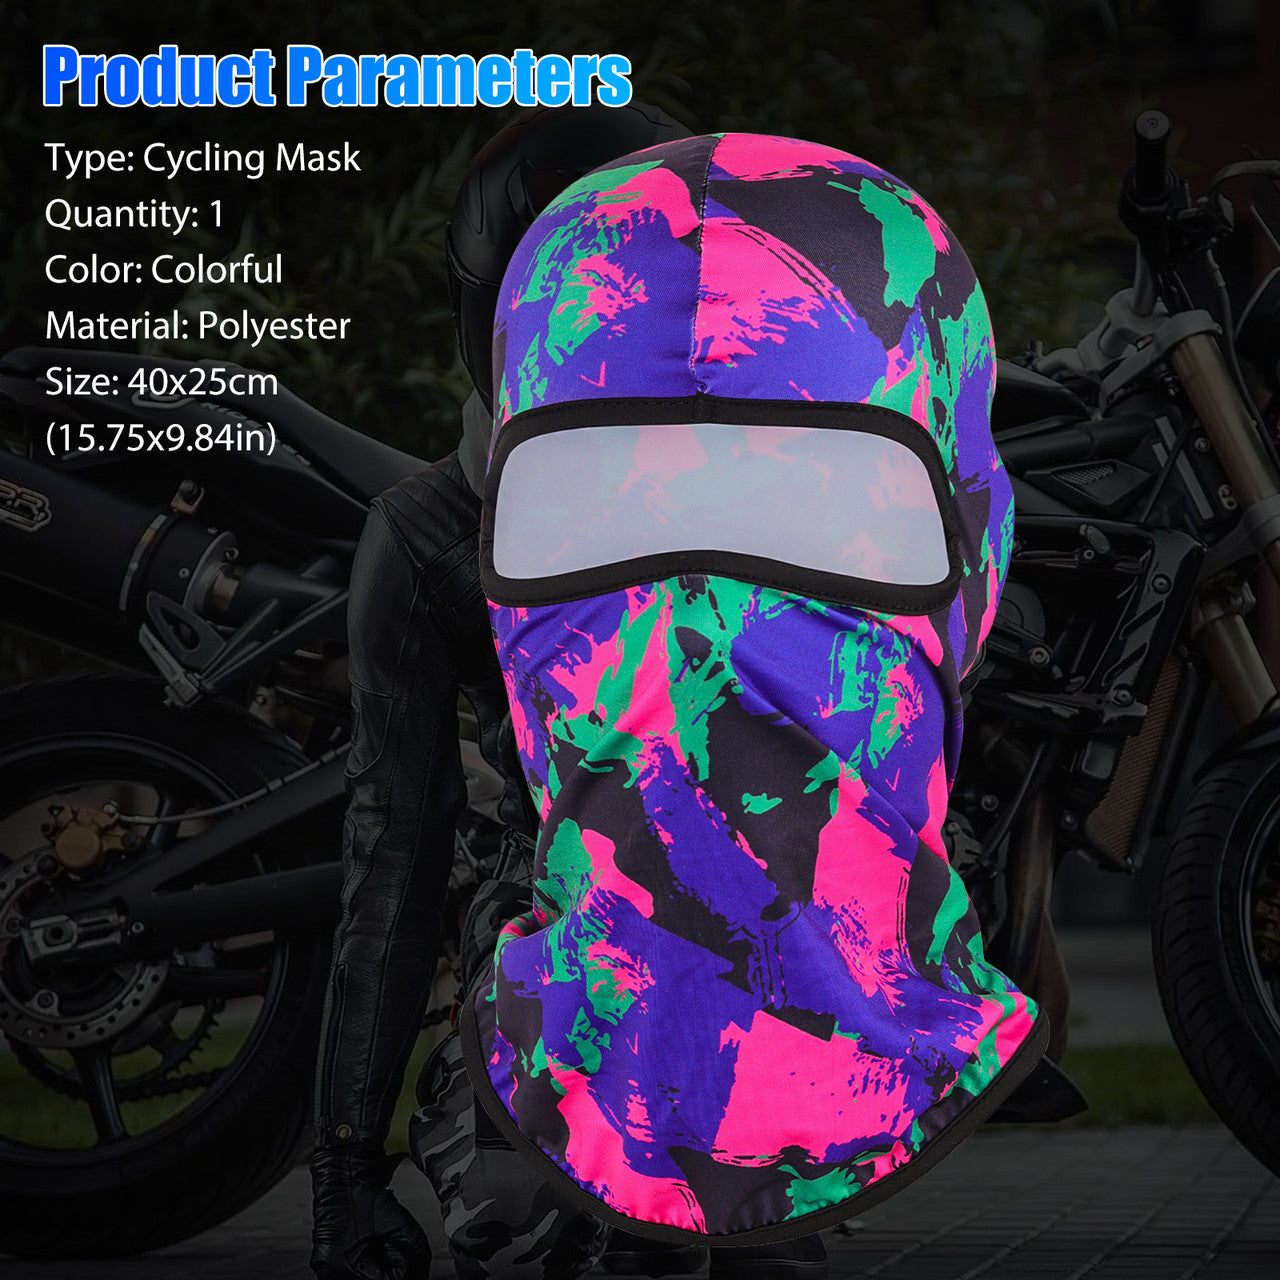 UV Mask Balaclava Knitted Full Face Cover - Ski Mask Winter Windproof Neck Warmer Thermal Cycling  (Pink Blue Camo)